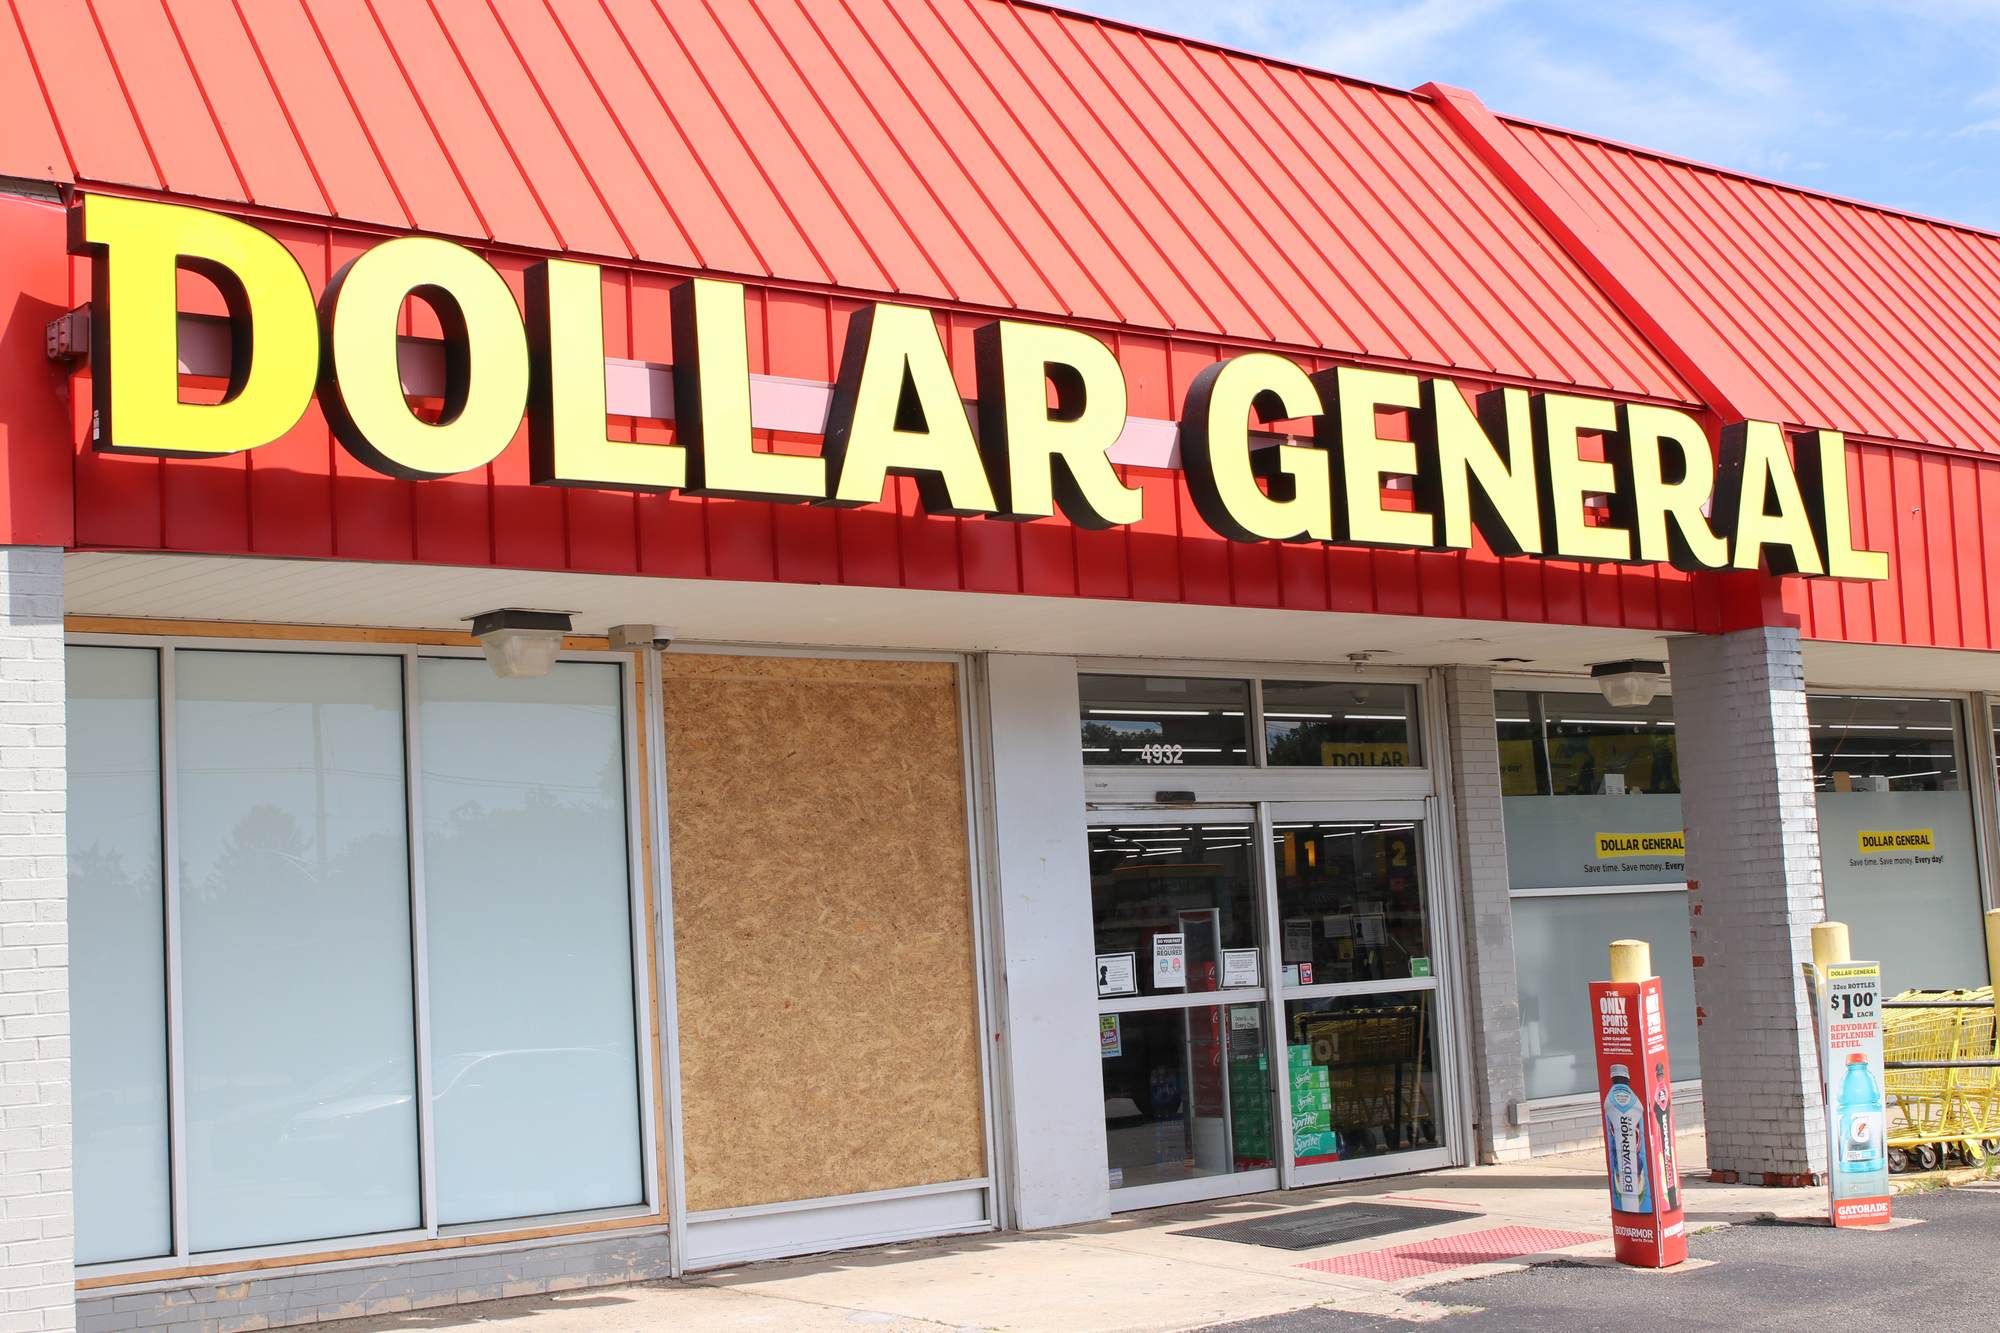 A deal has been reached in a class action lawsuit against Dollar General alleging violations of the Americans with Disabilities Act.